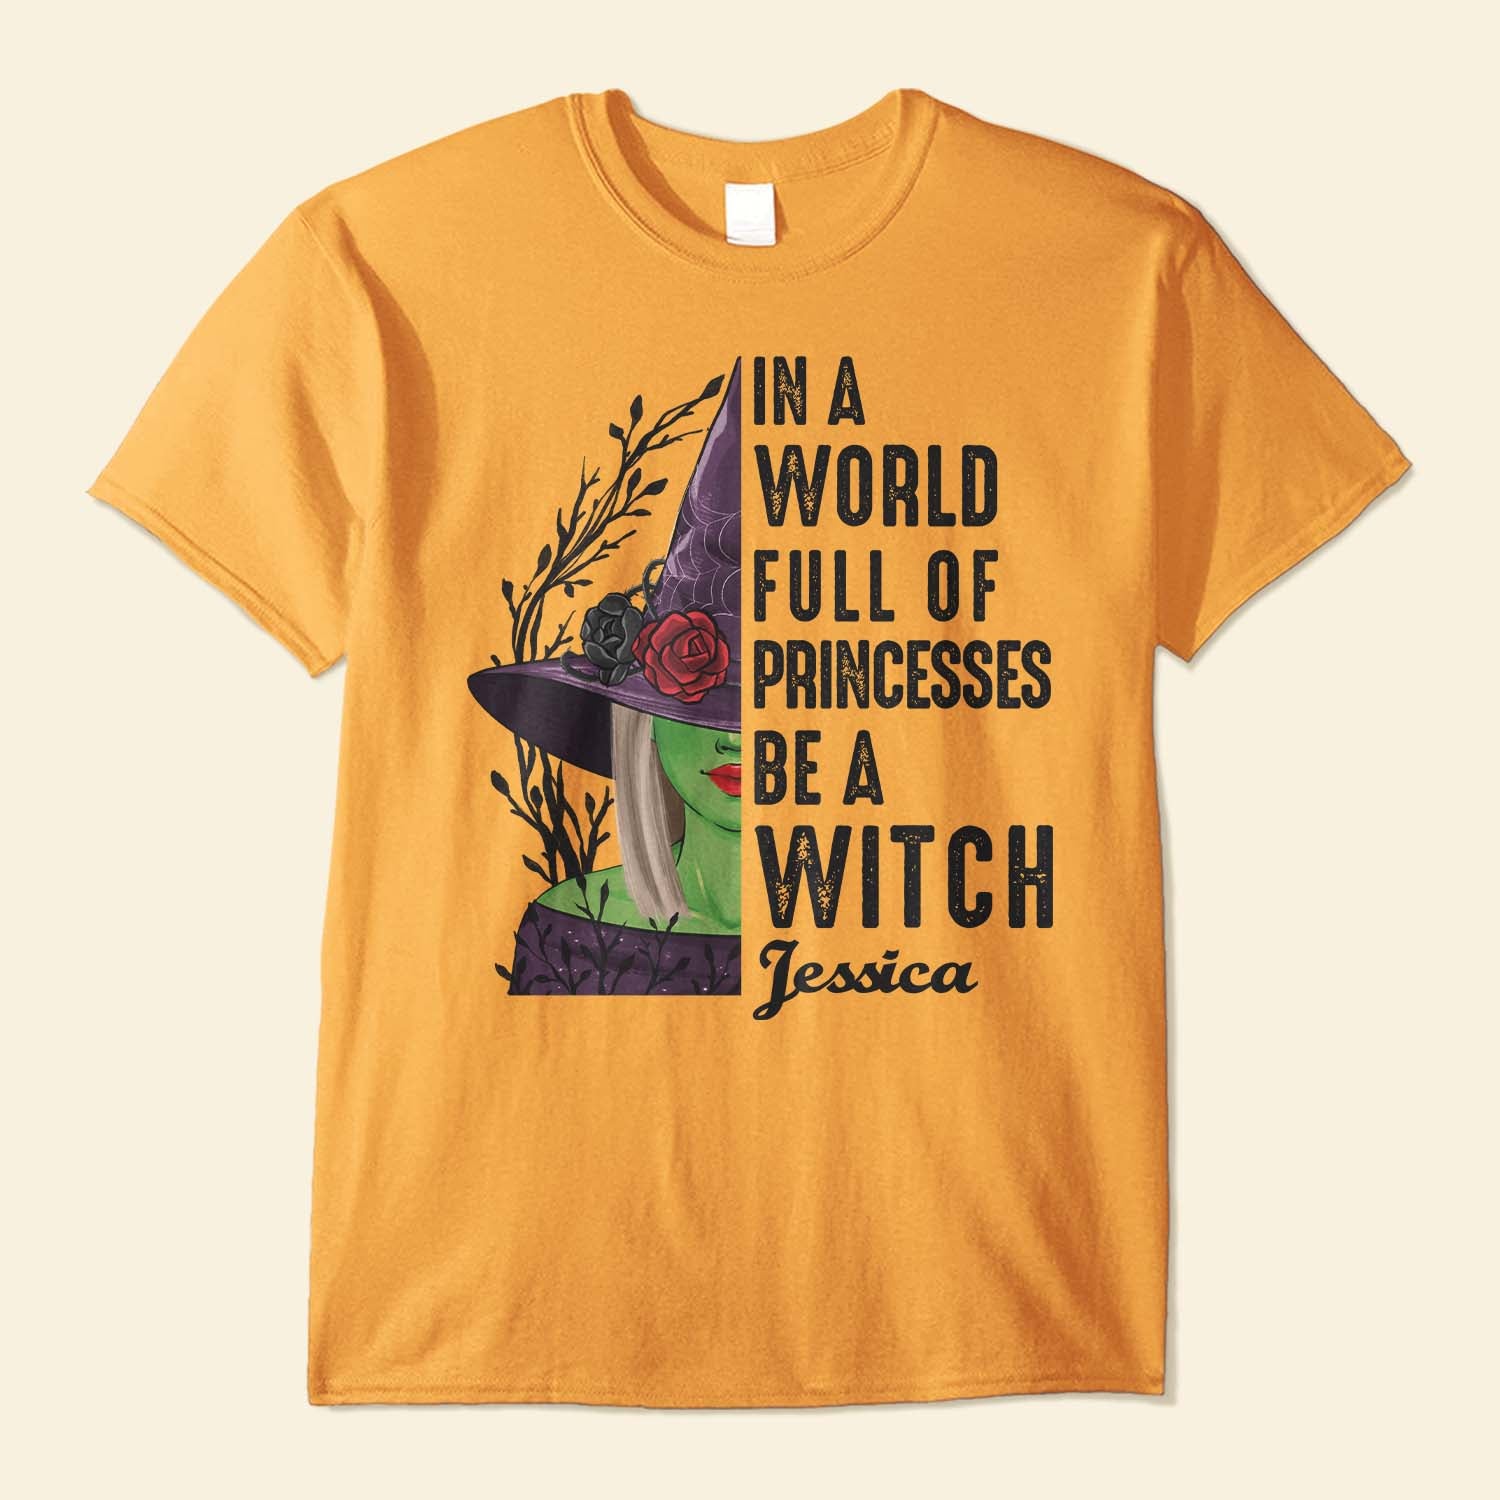 In A World Full Of Princesses Be A Witch - Personalized Shirt - Fall Season Gift For Girls - Girl Front